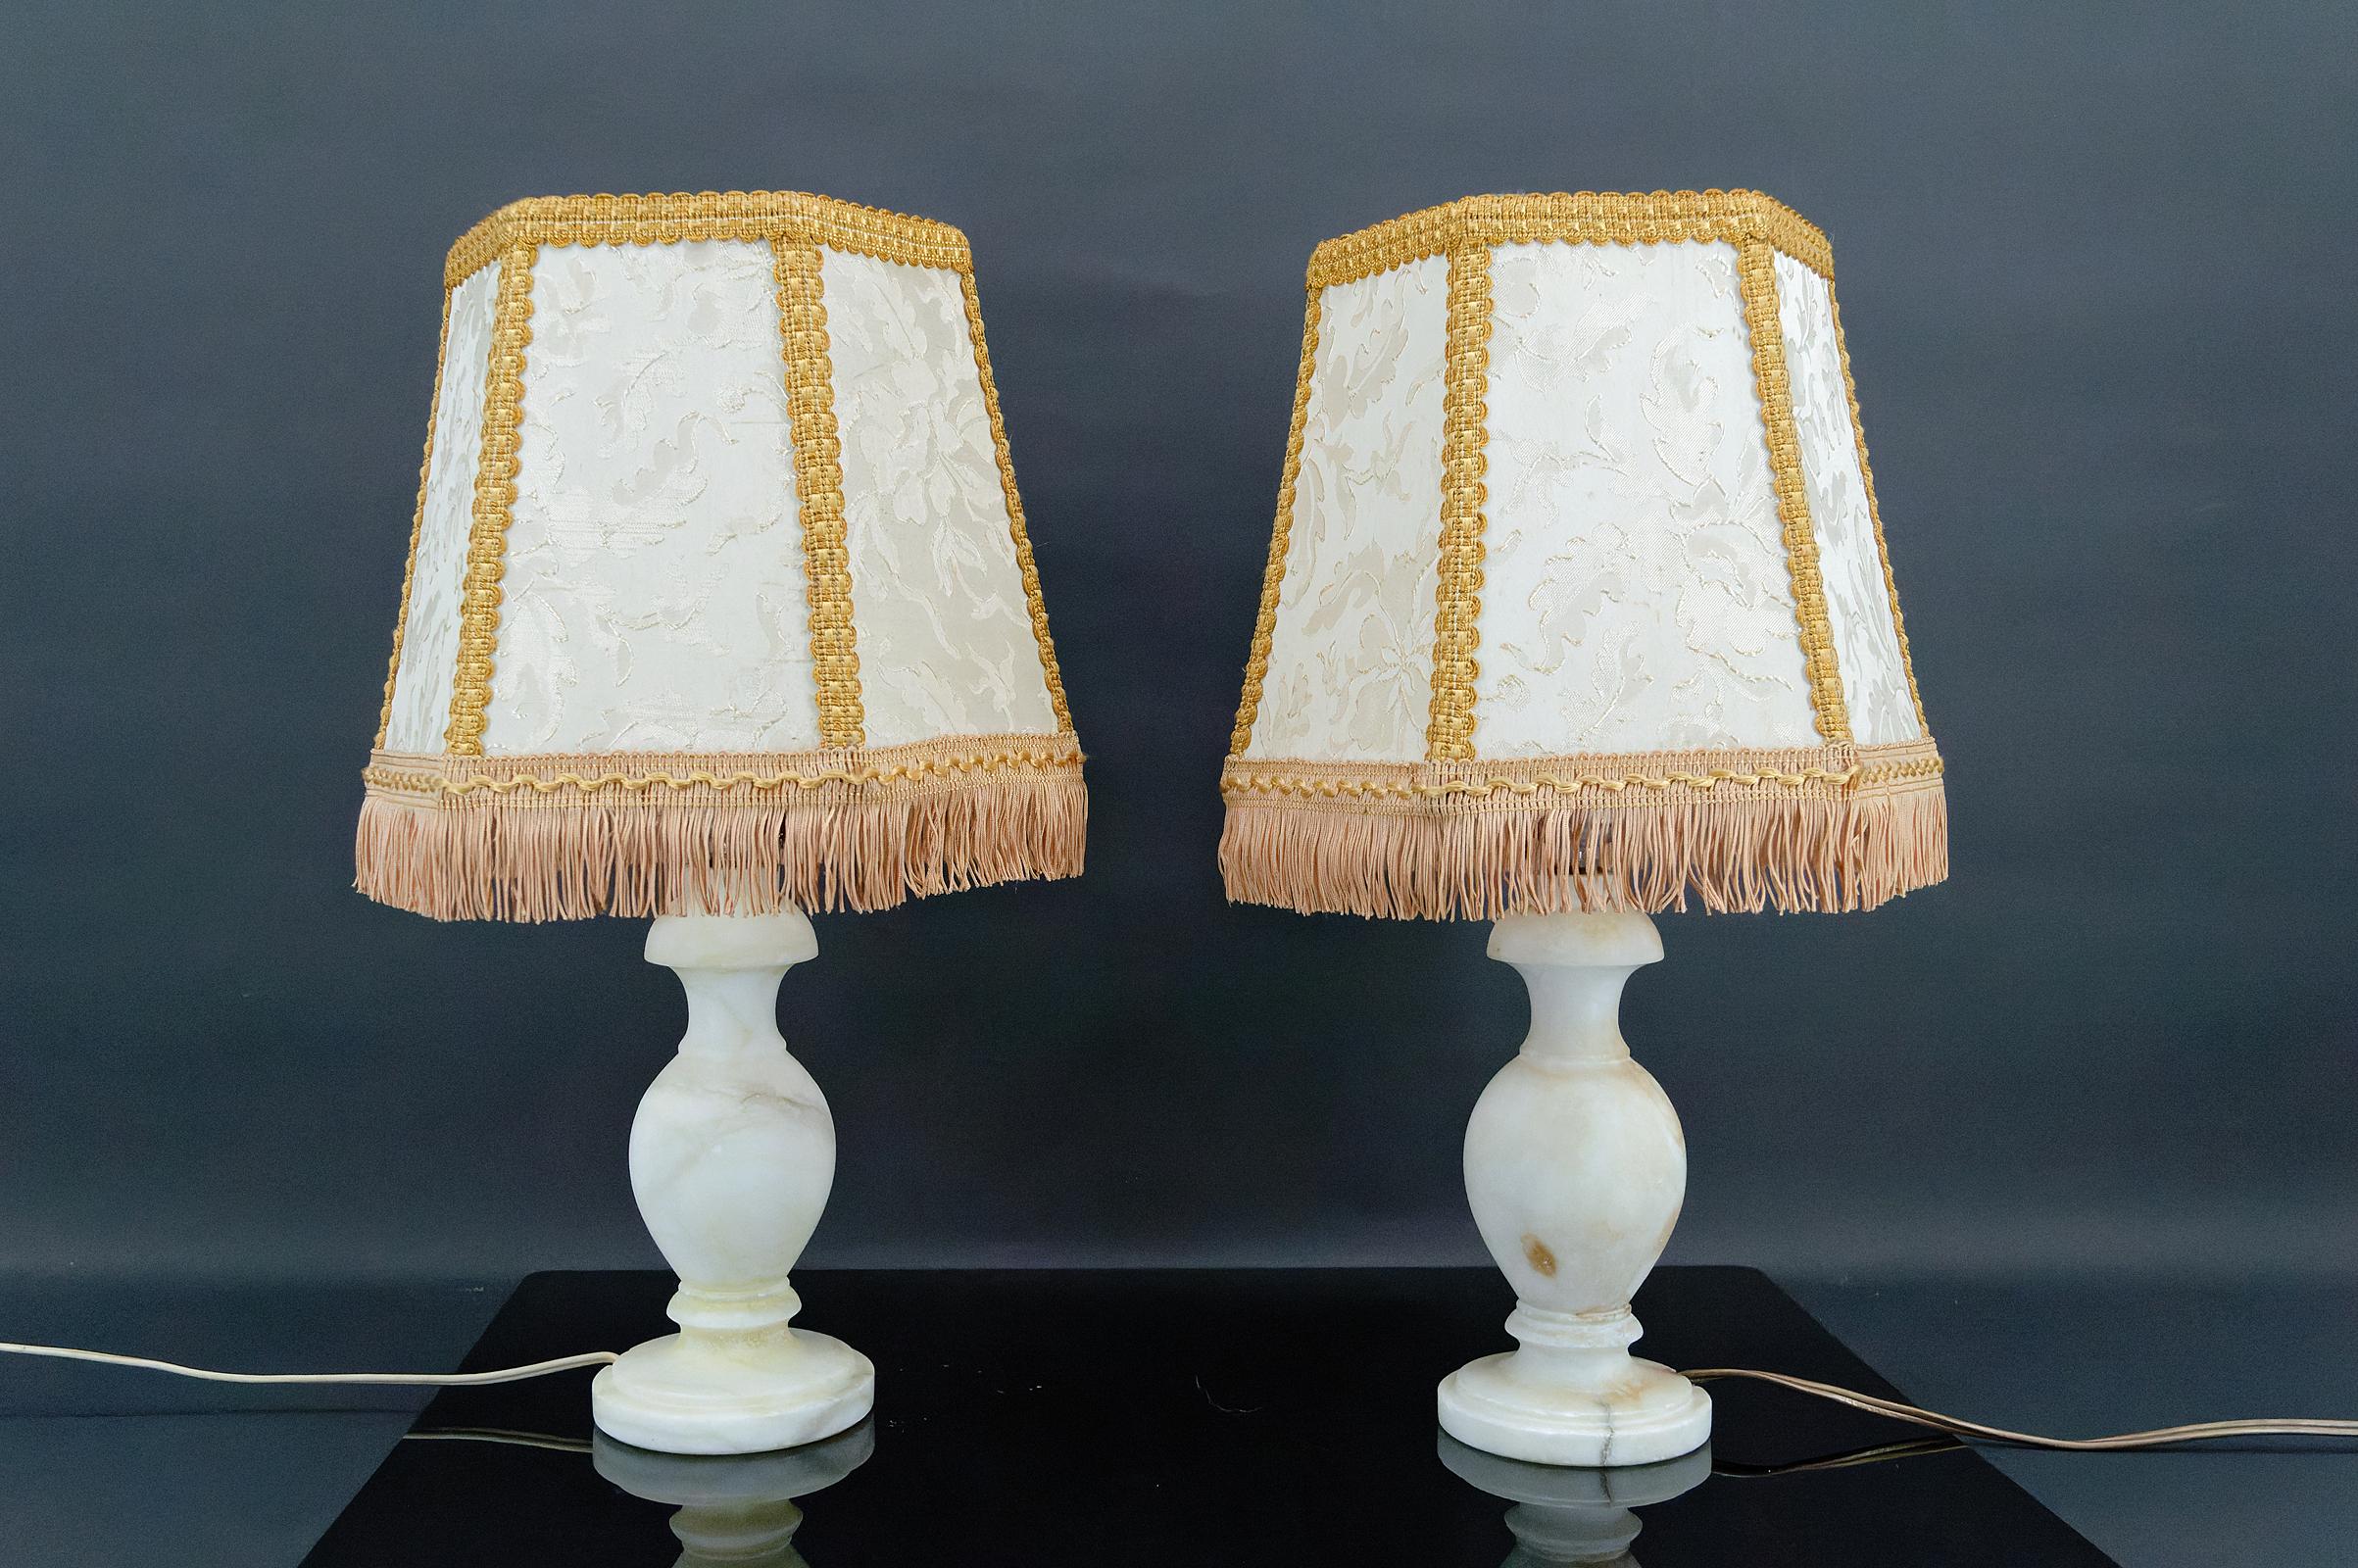 Neoclassical Revival Pair of alabaster lamps, Neo-Classical / Hollywood Regency, Italy, circa 1940 For Sale